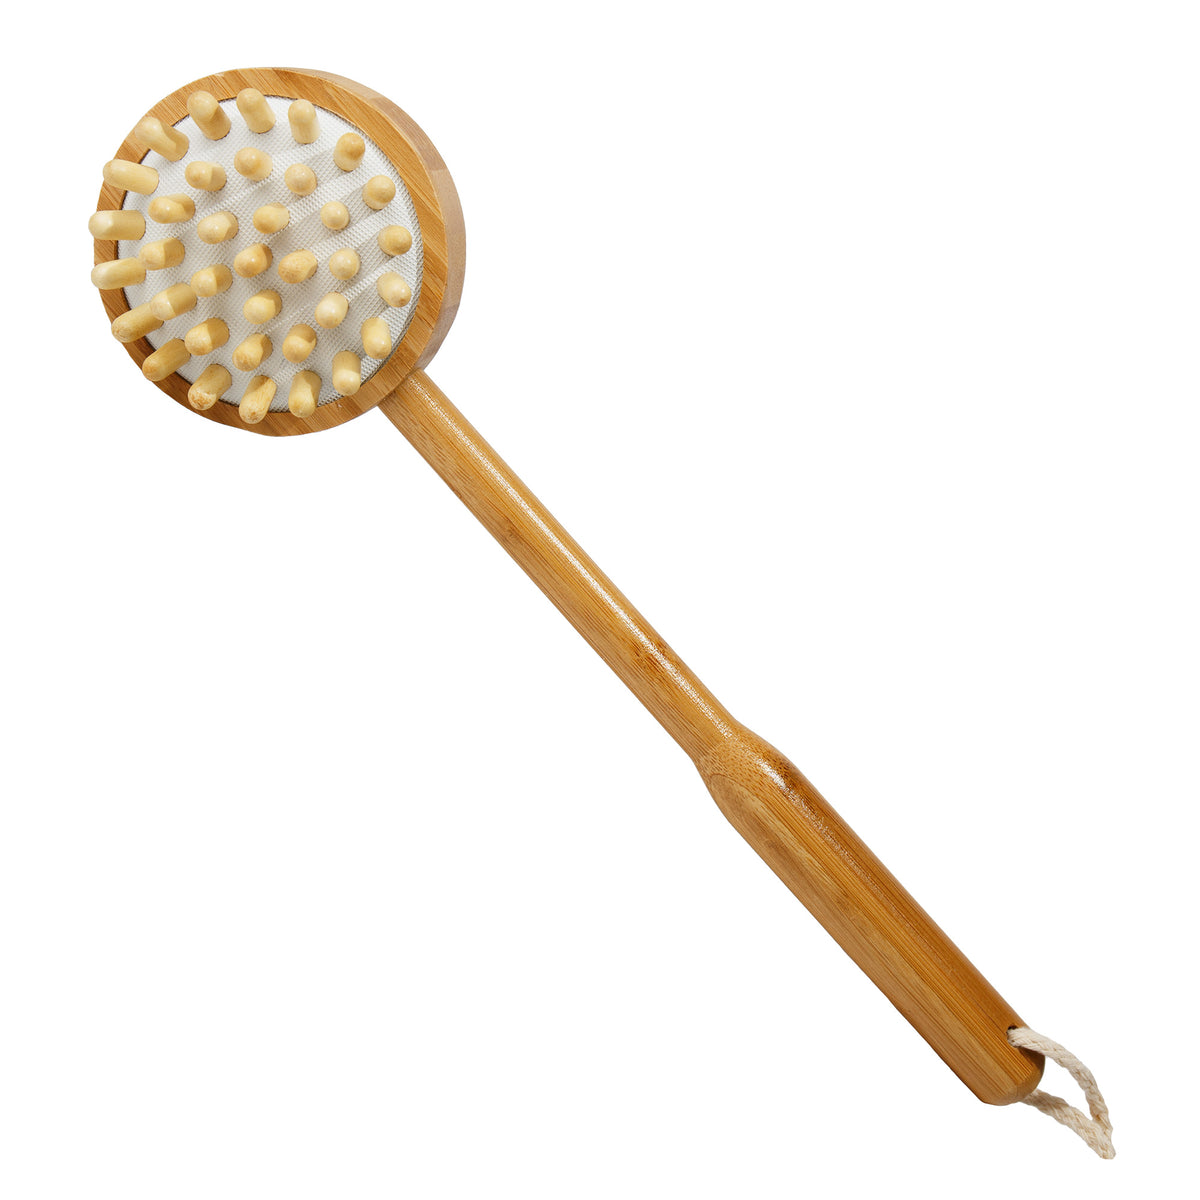 Primary image of Baudelaire Bamboo Massager Brush